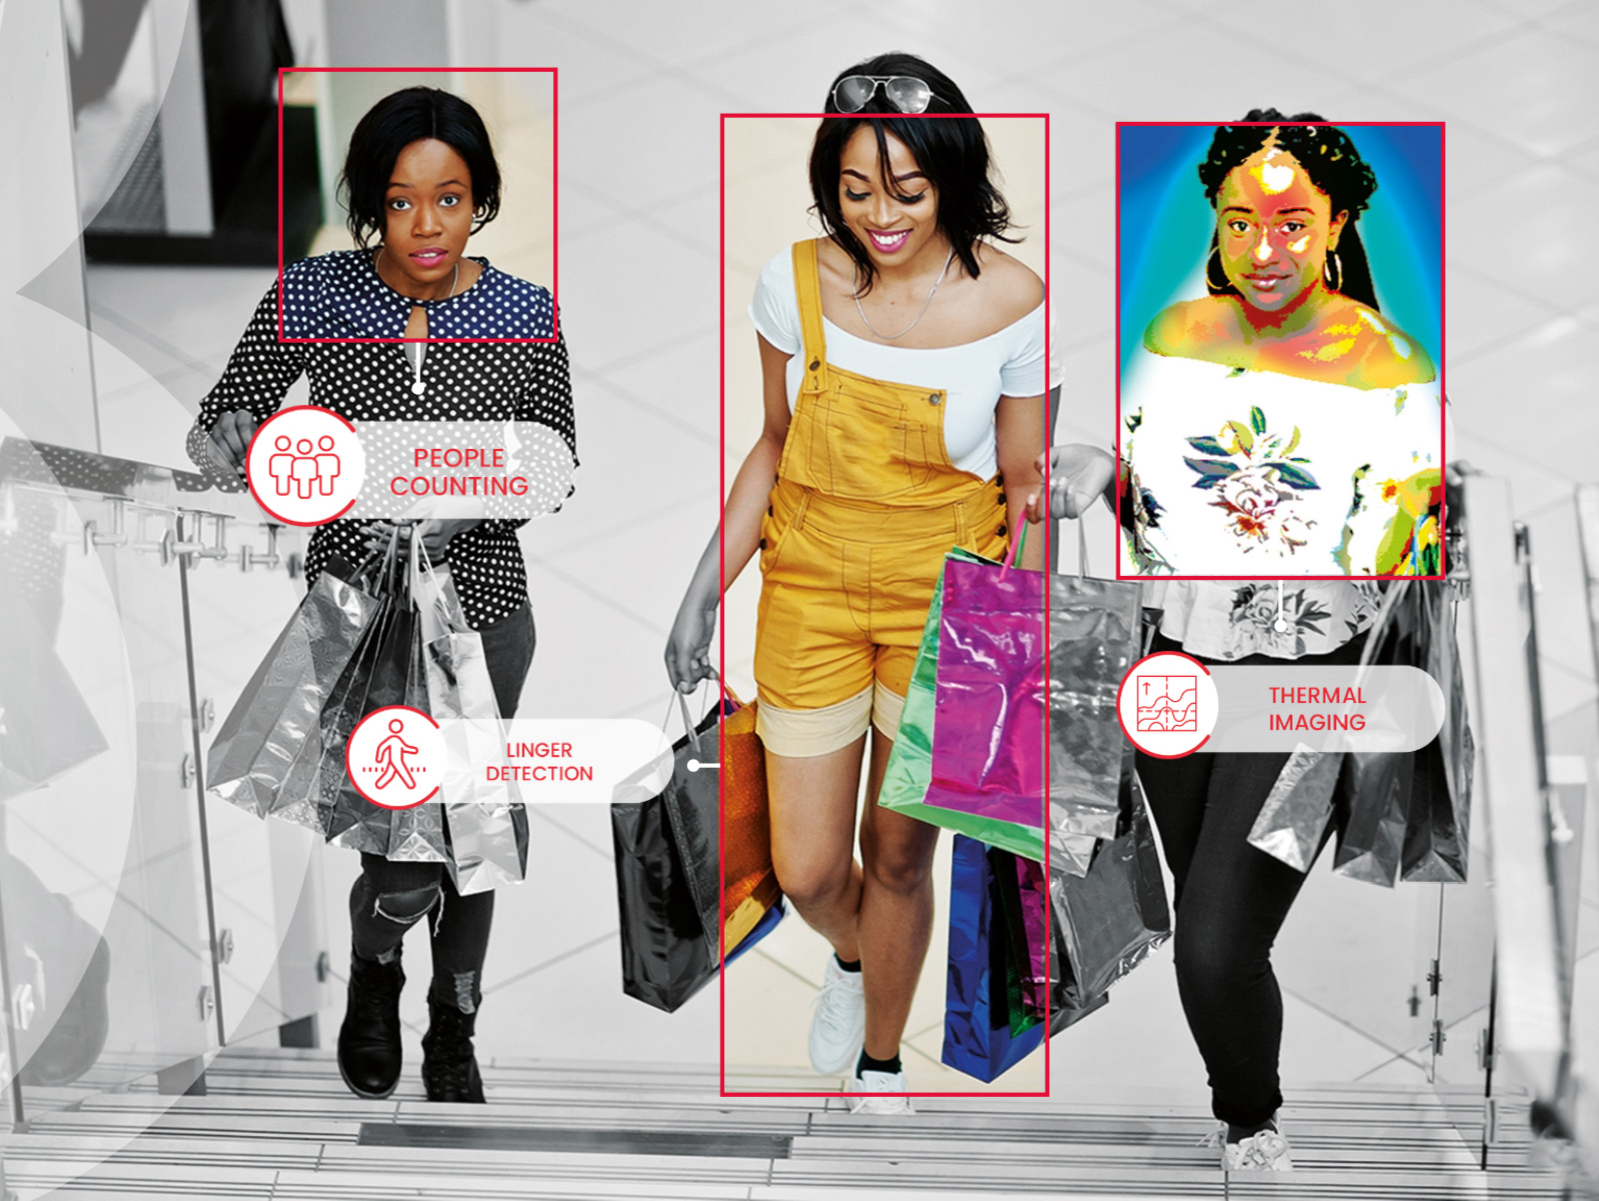 Three women shopping being tagged by surveillance camera